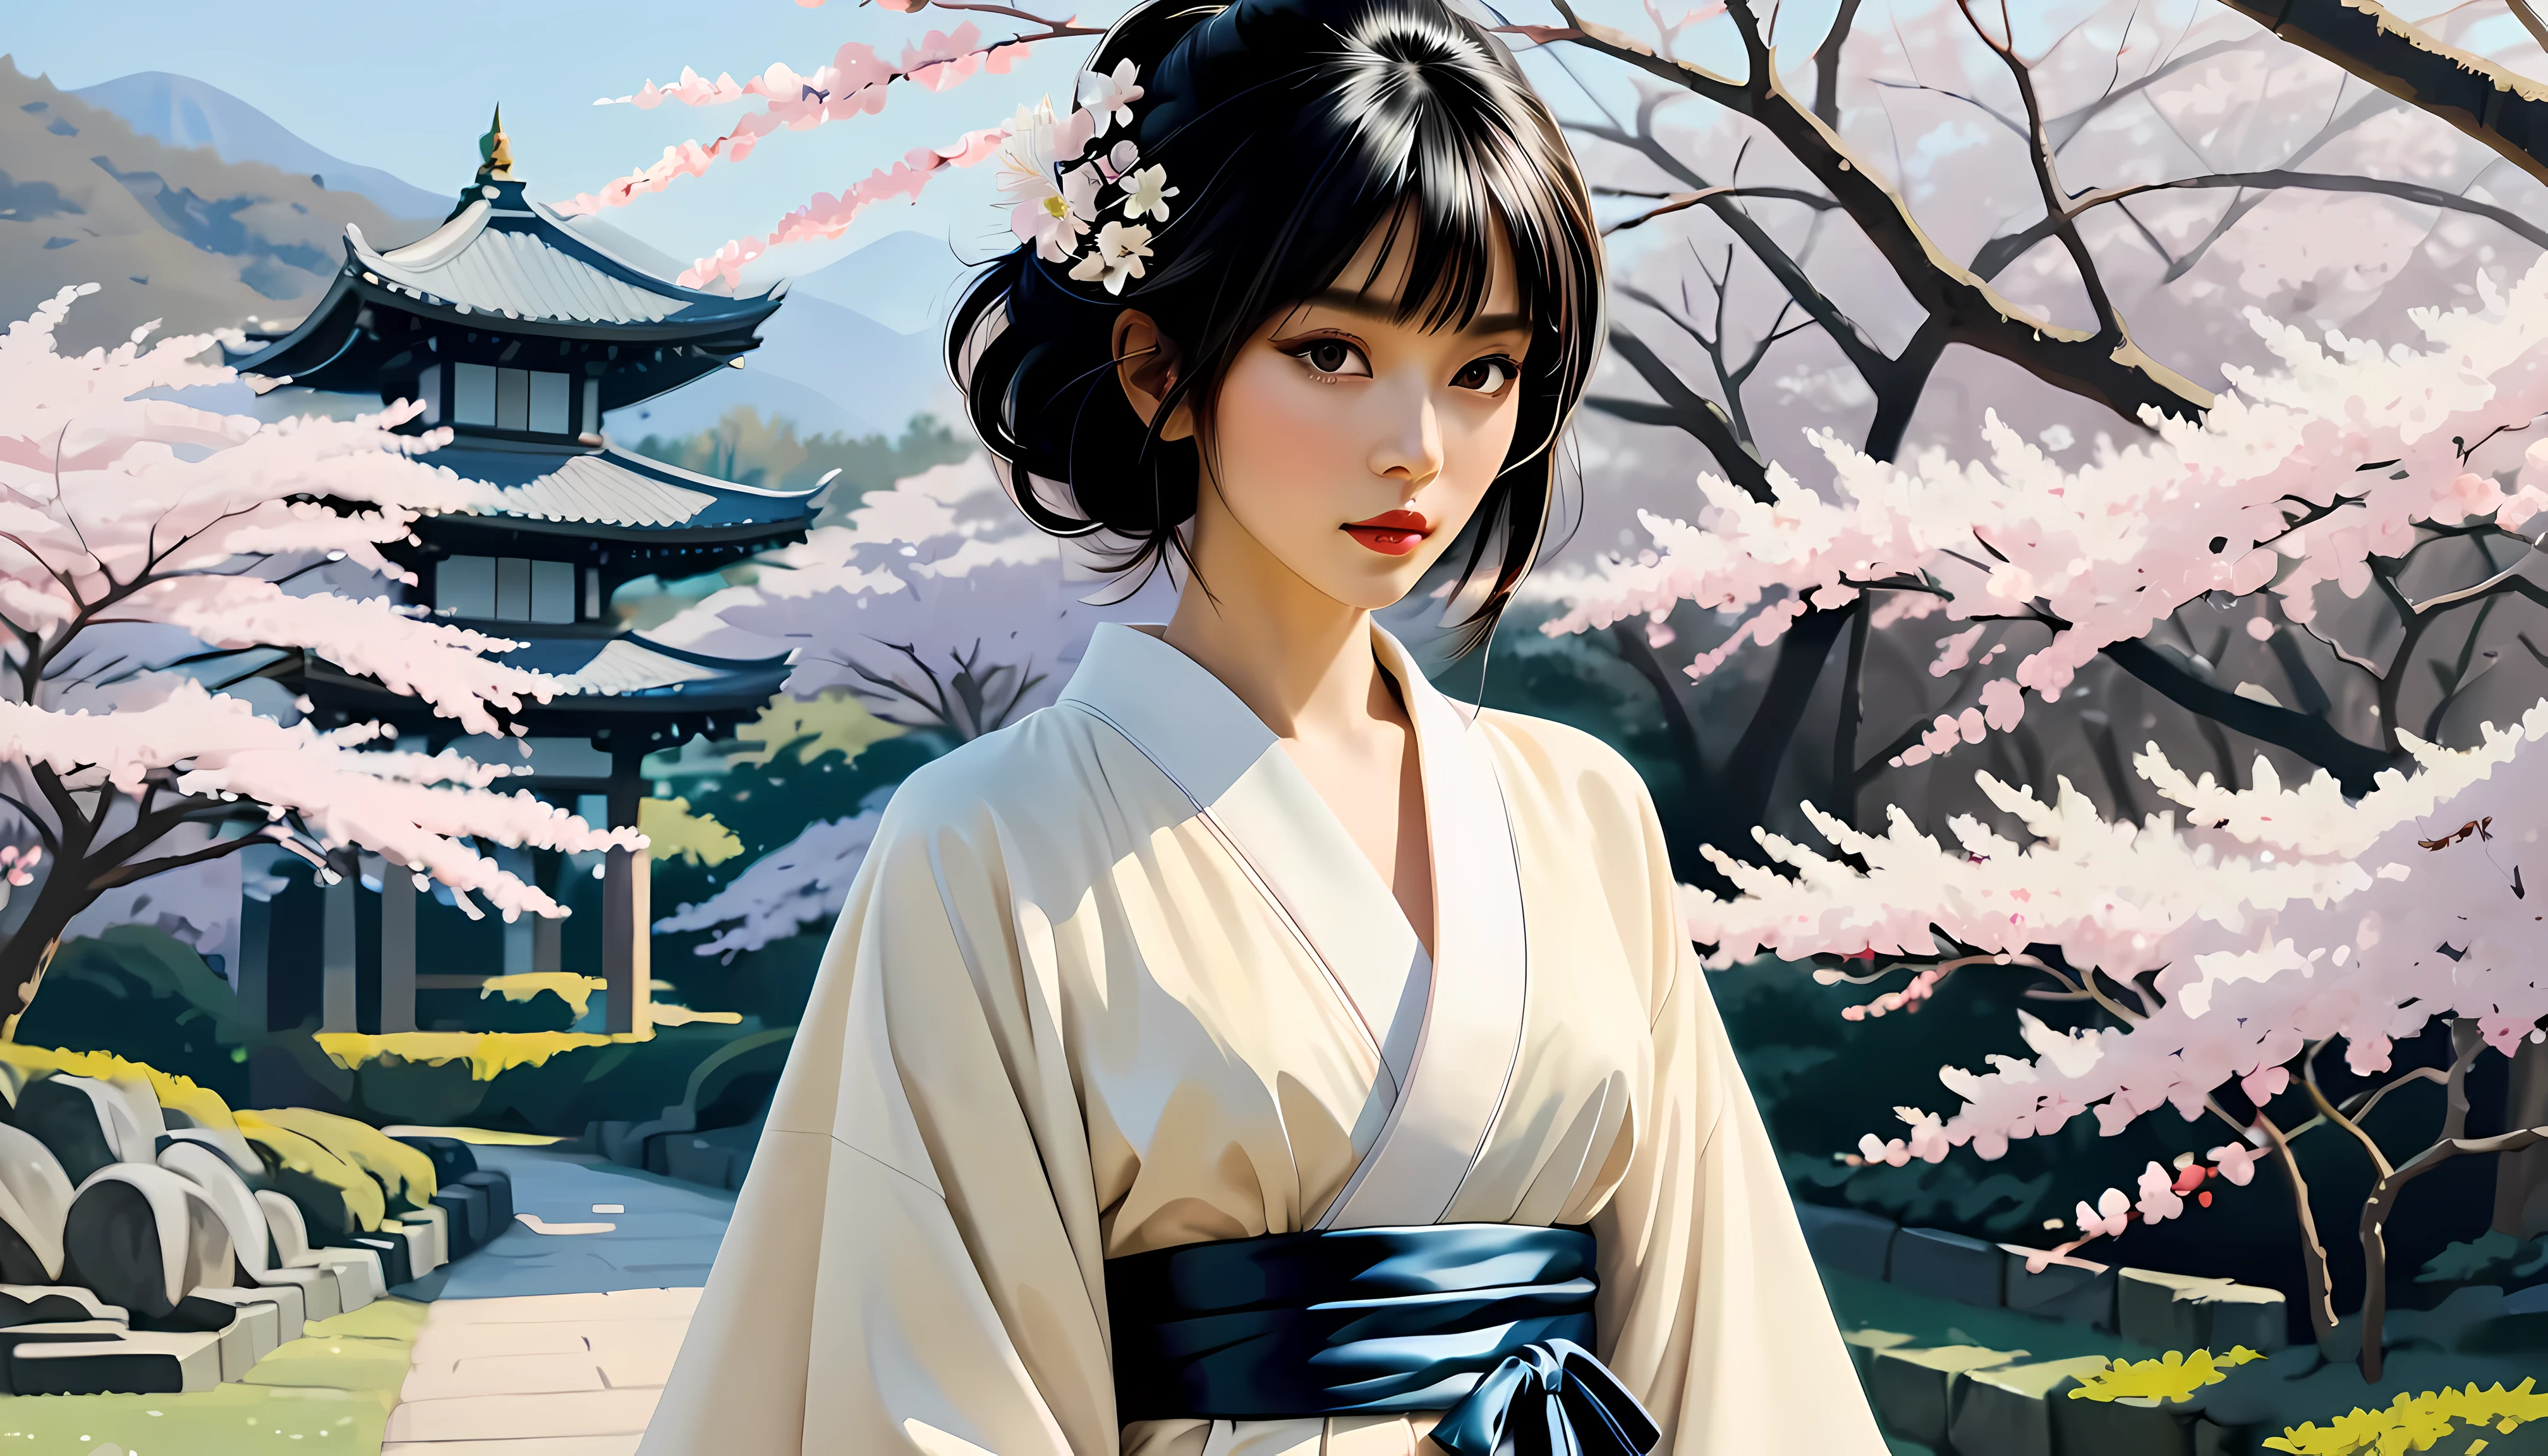 ((full body):1.2), smooth lines; Express expressions and postures through ink contrast, The background is a sakura garden. emphasize light, shadow and space. Drawing of Supermodel Japanese Beauty. Black hair, (messy bangs hairstyle), ((fresh)), golden ratio face, perfect face, (attractive body), (fashion model body), wearing maiden robe, fine art piece, figurative art, Dress neatly. sexy painting, Wallop | (best quality, 4K, 8k, high resolution,masterpiece:1.2), Super detailed,(actual, photoactual, photo-actual:1.37).